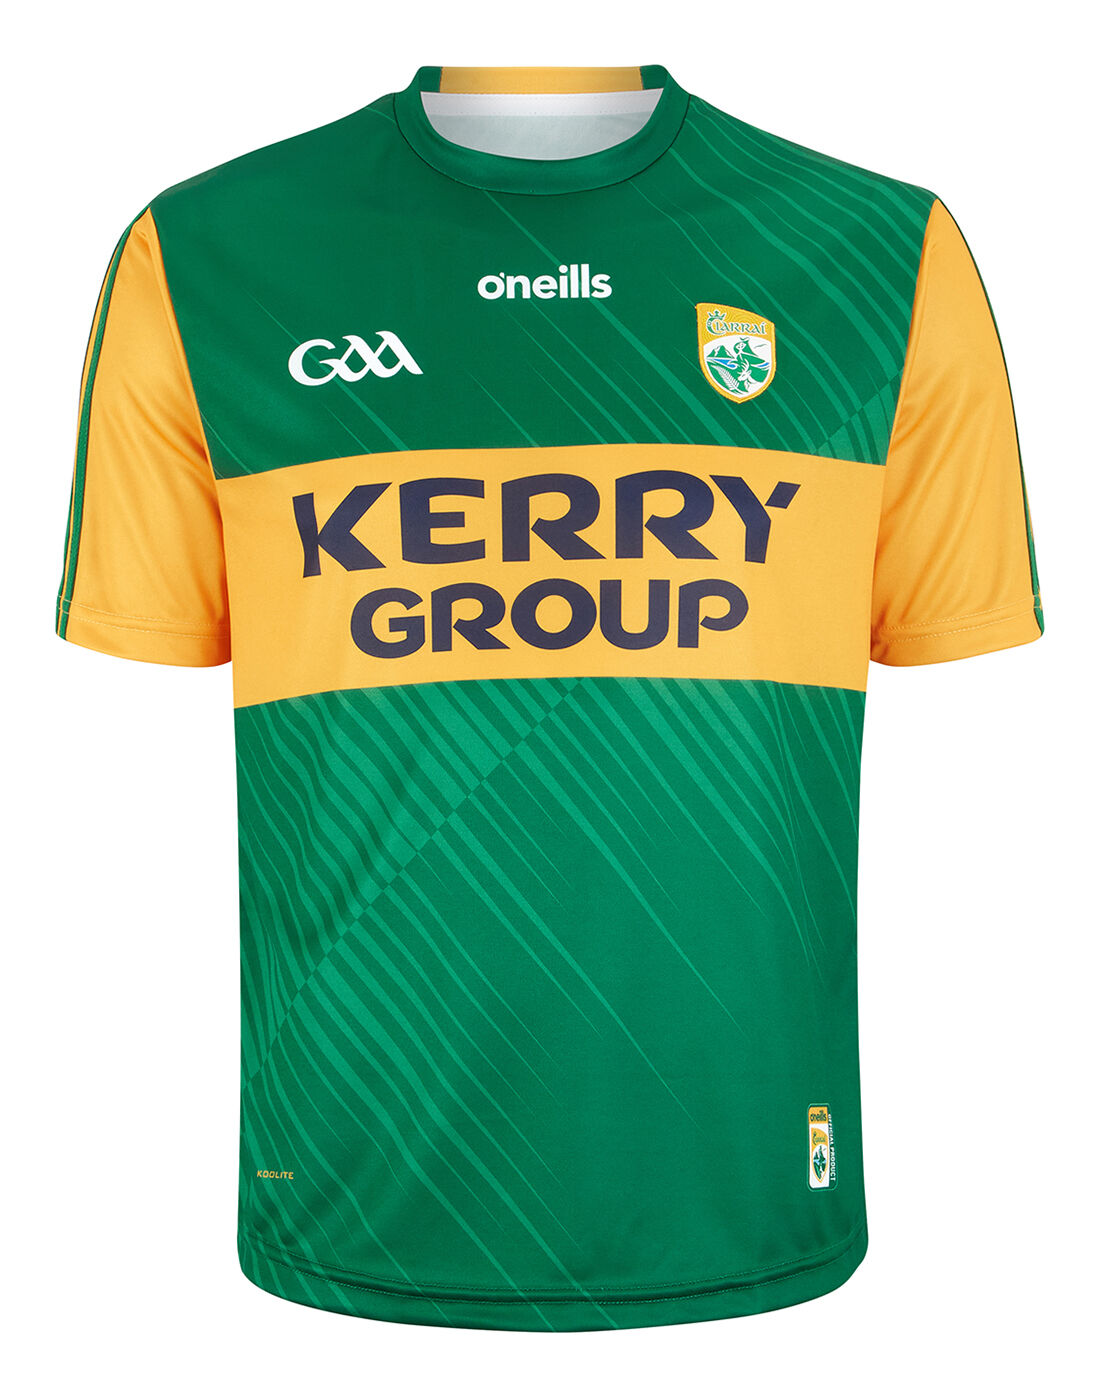 adidas kerry jersey for sale